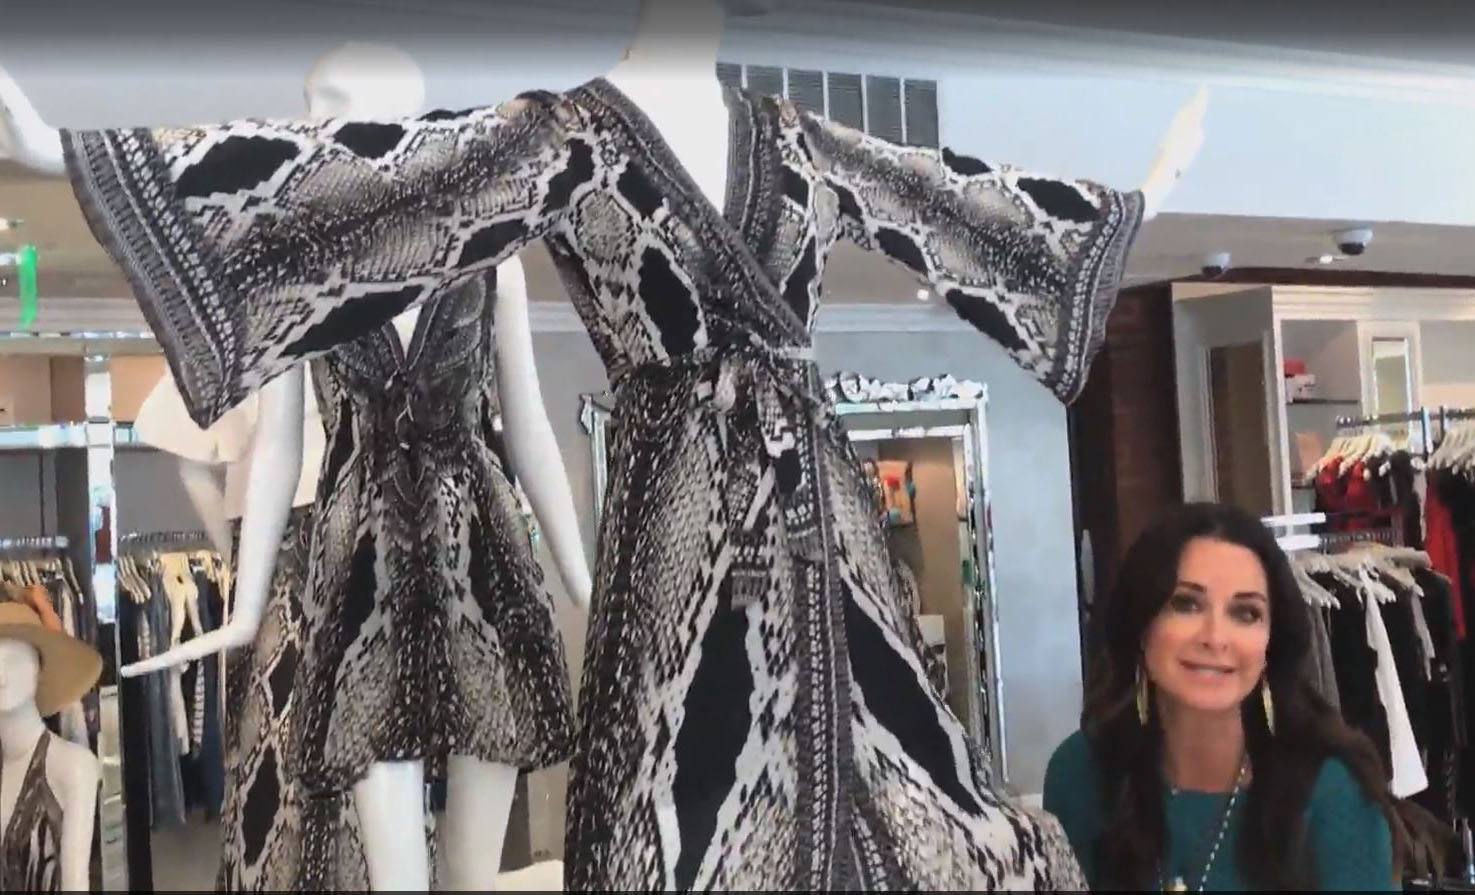 Kyle Richards talks about Shahida Parides being one of her favorite brands on Bravo's series "Catching Up With the RHOBH ‘Wives!" while she shows her store. 